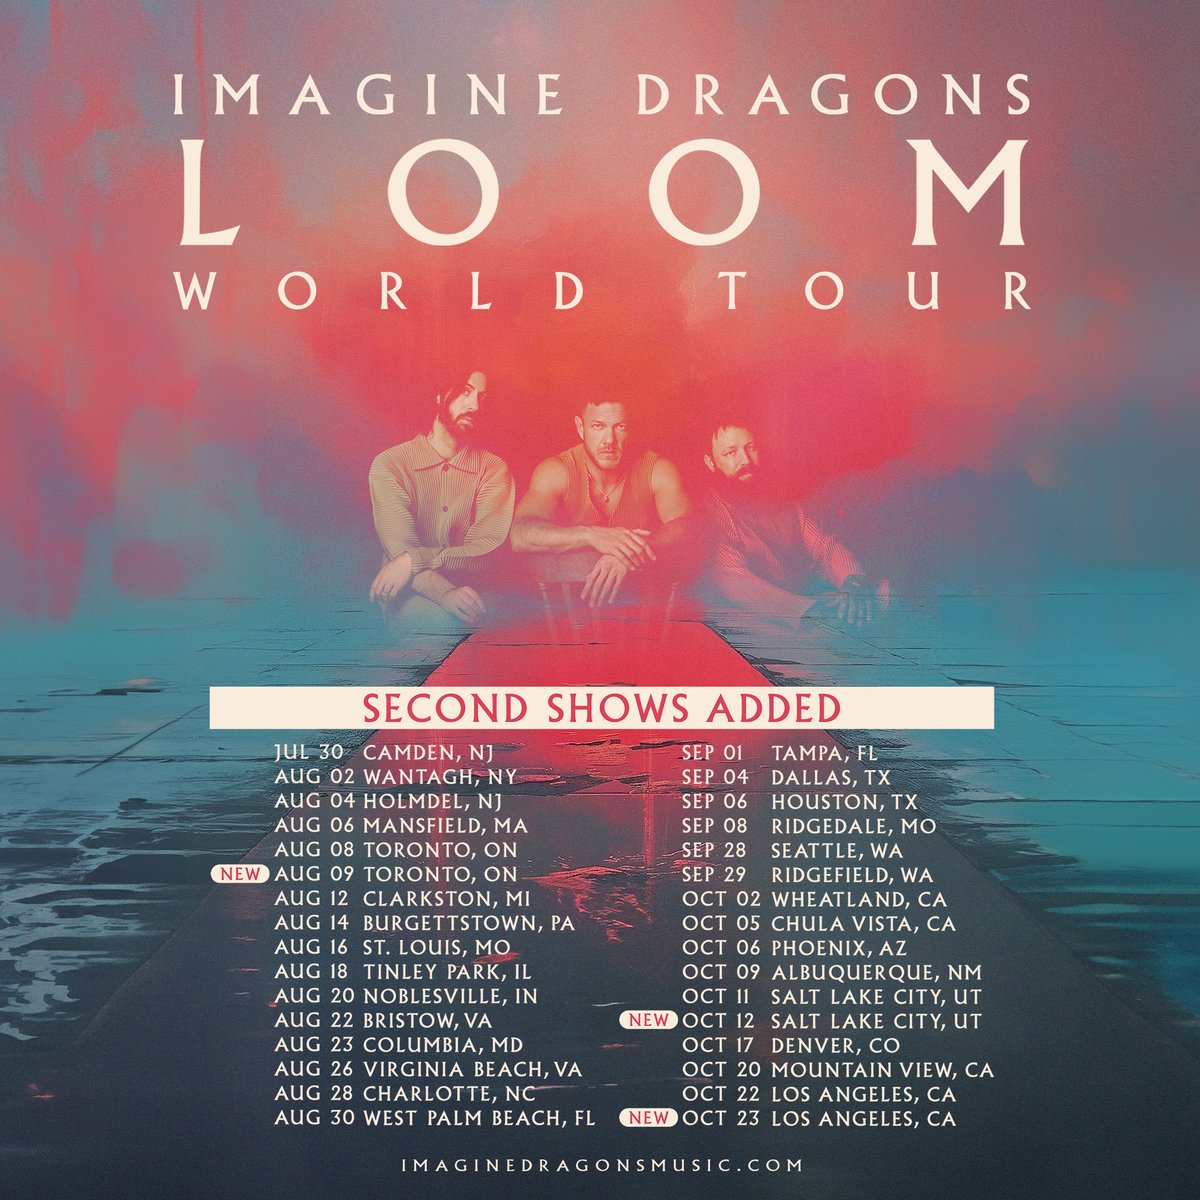 JUST ANNOUNCED: Due to incredible demand, @Imaginedragons have added shows to LOOM WORLD TOUR. Presales start tomorrow at 10am local. Tickets on sale this Friday at 10 am local: livemu.sc/3d5K6TX